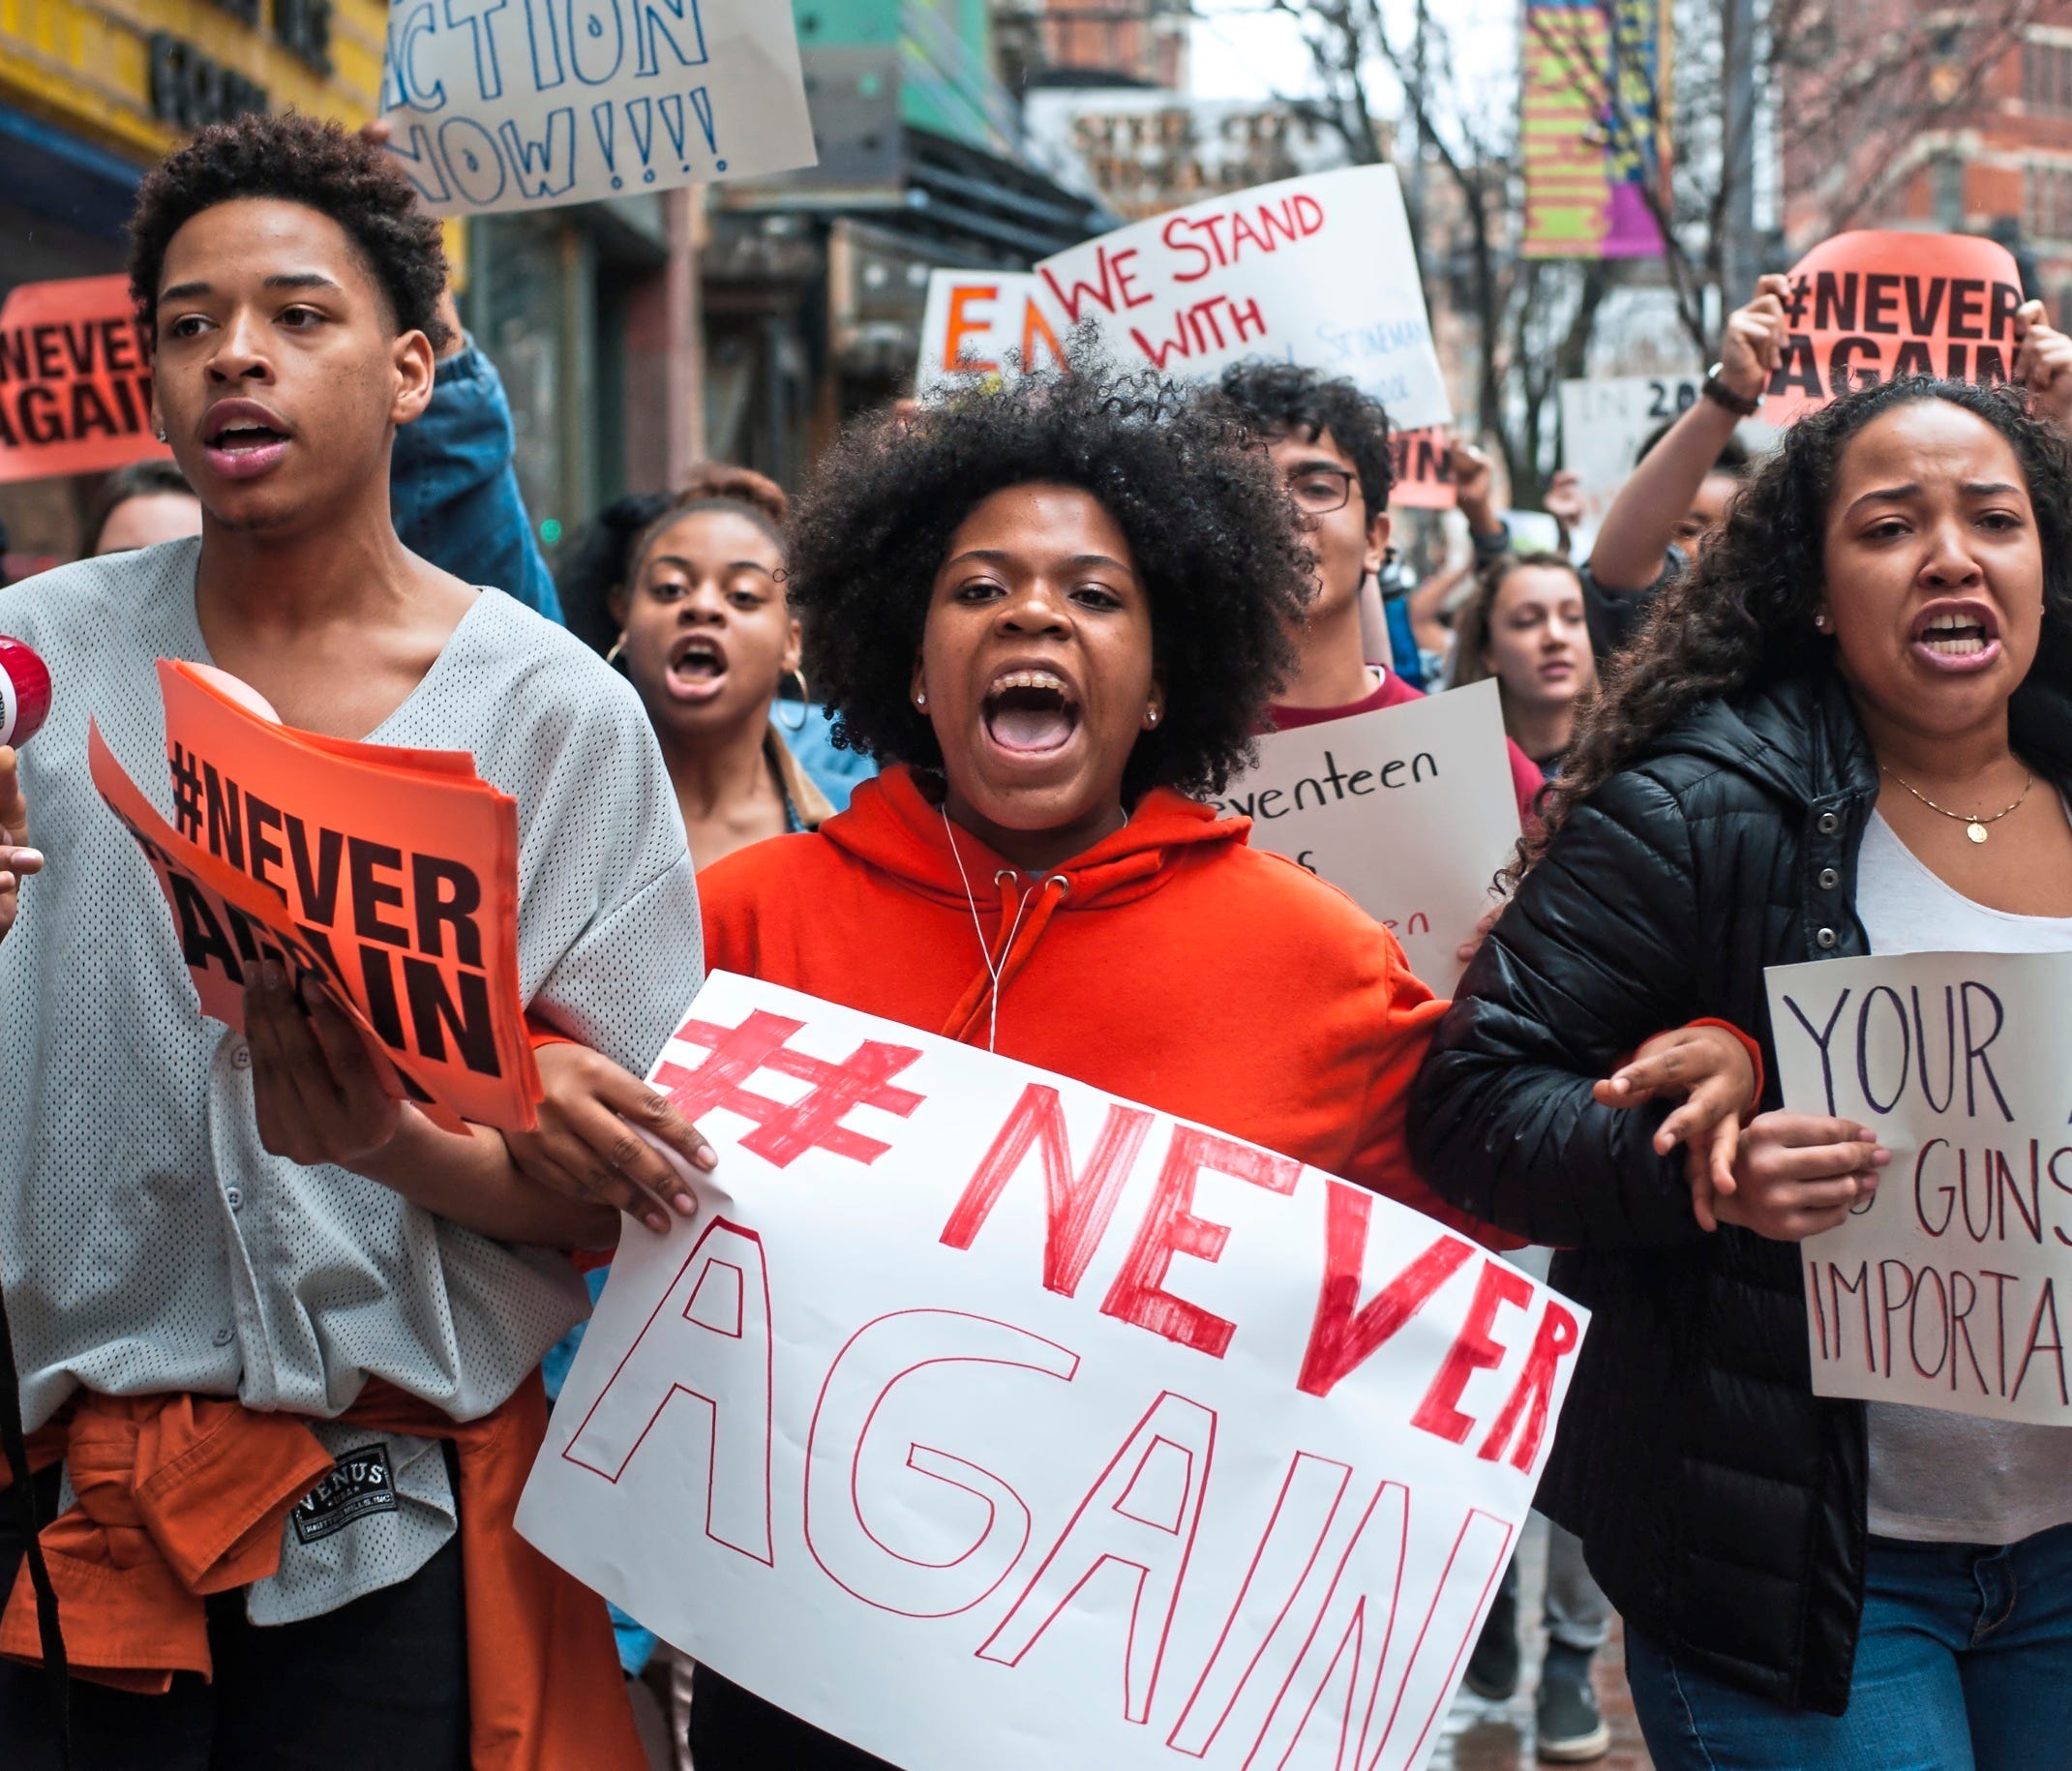 High school students Mia Arrington, center, 18, of West End, and Cheyenne Springette, right, 17, of Mt. Oliver, lead chants as they march down Liberty Avenue during a walk-out in solidarity with other high schools across the country to show support f